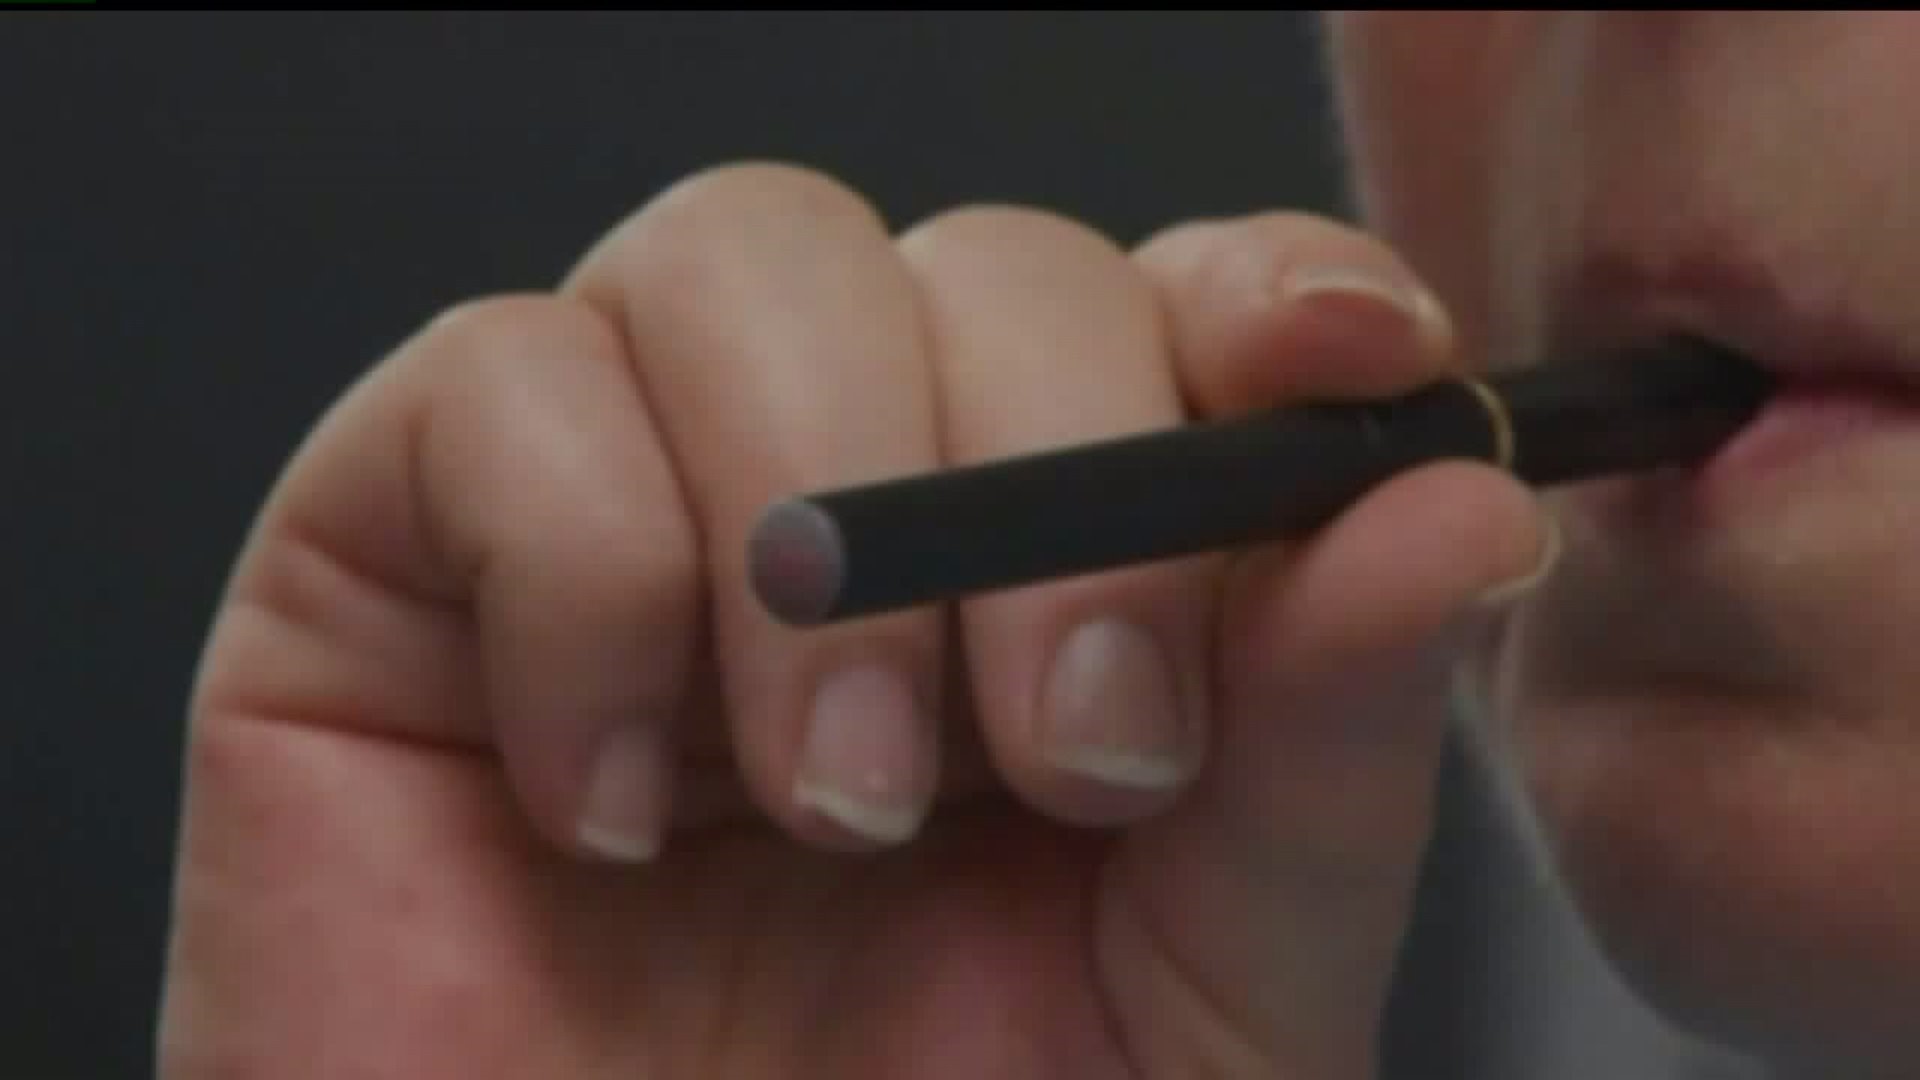 FOX43 Reveals: Inside the possible cause of mysterious vaping-related illness